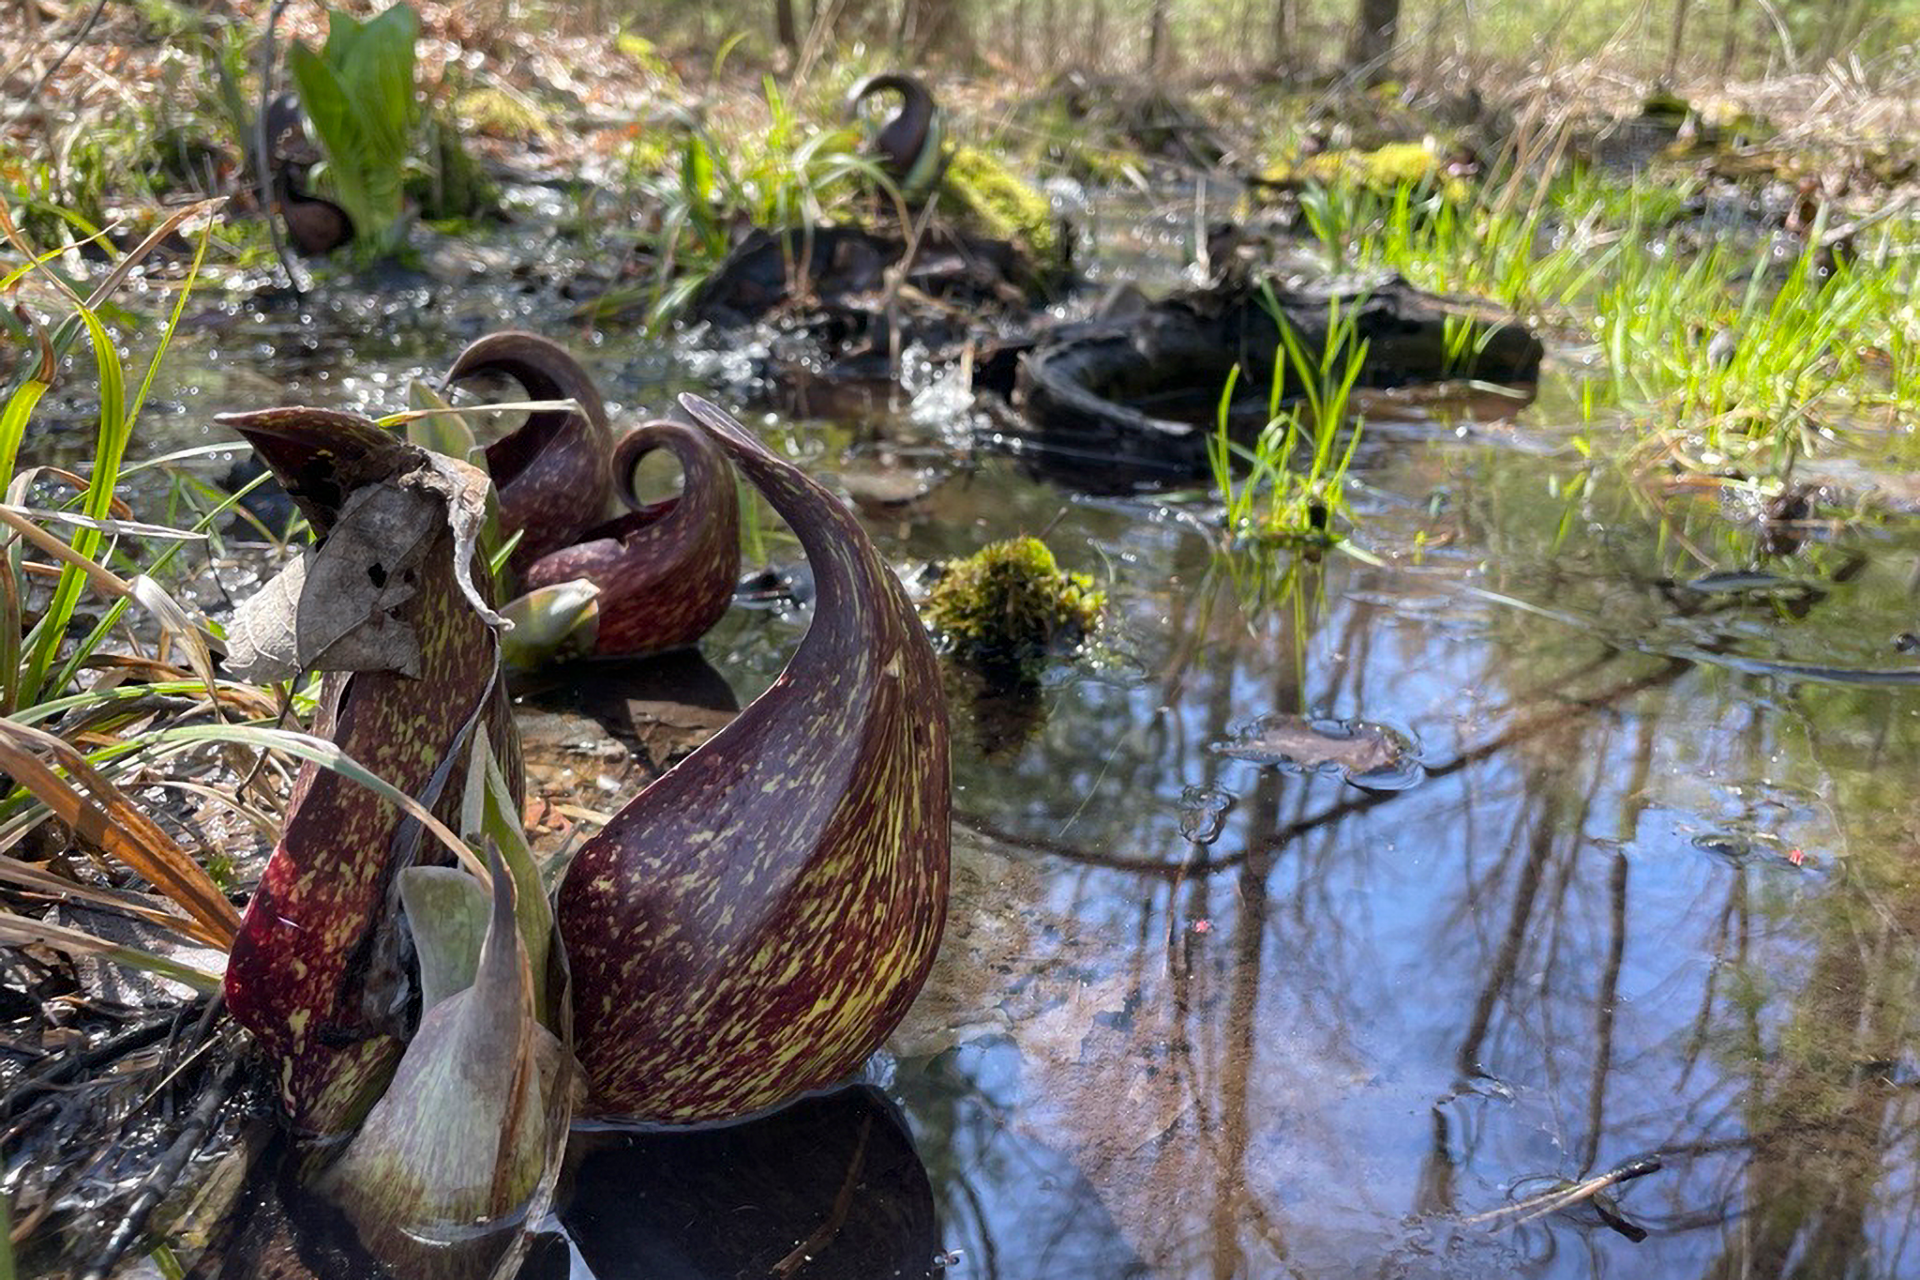 Skunk cabbage at the edge of a pond